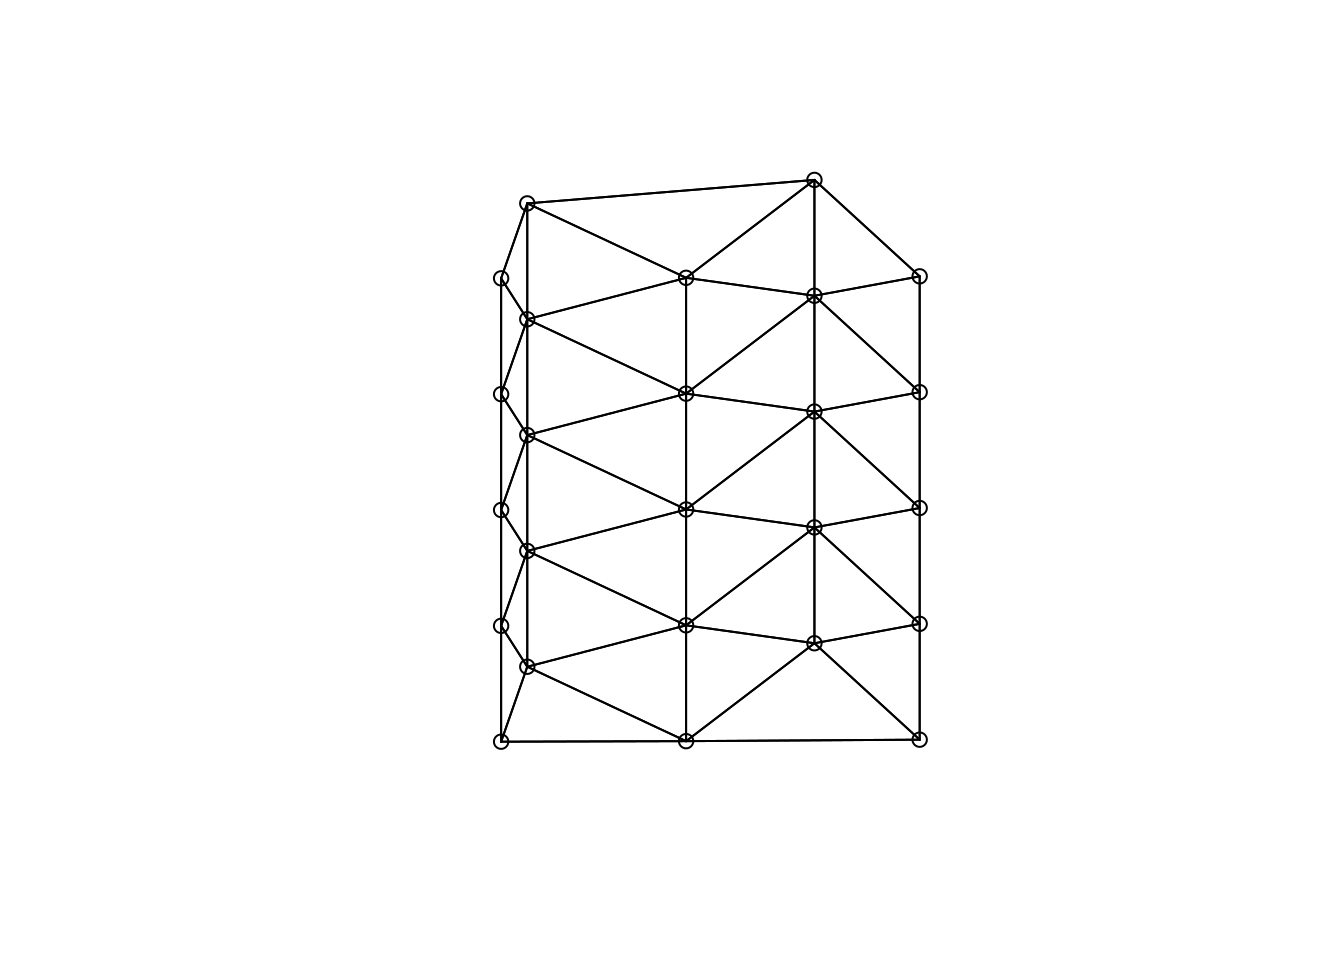 Delauny triangulation as an example of a graph base neighborhood definition